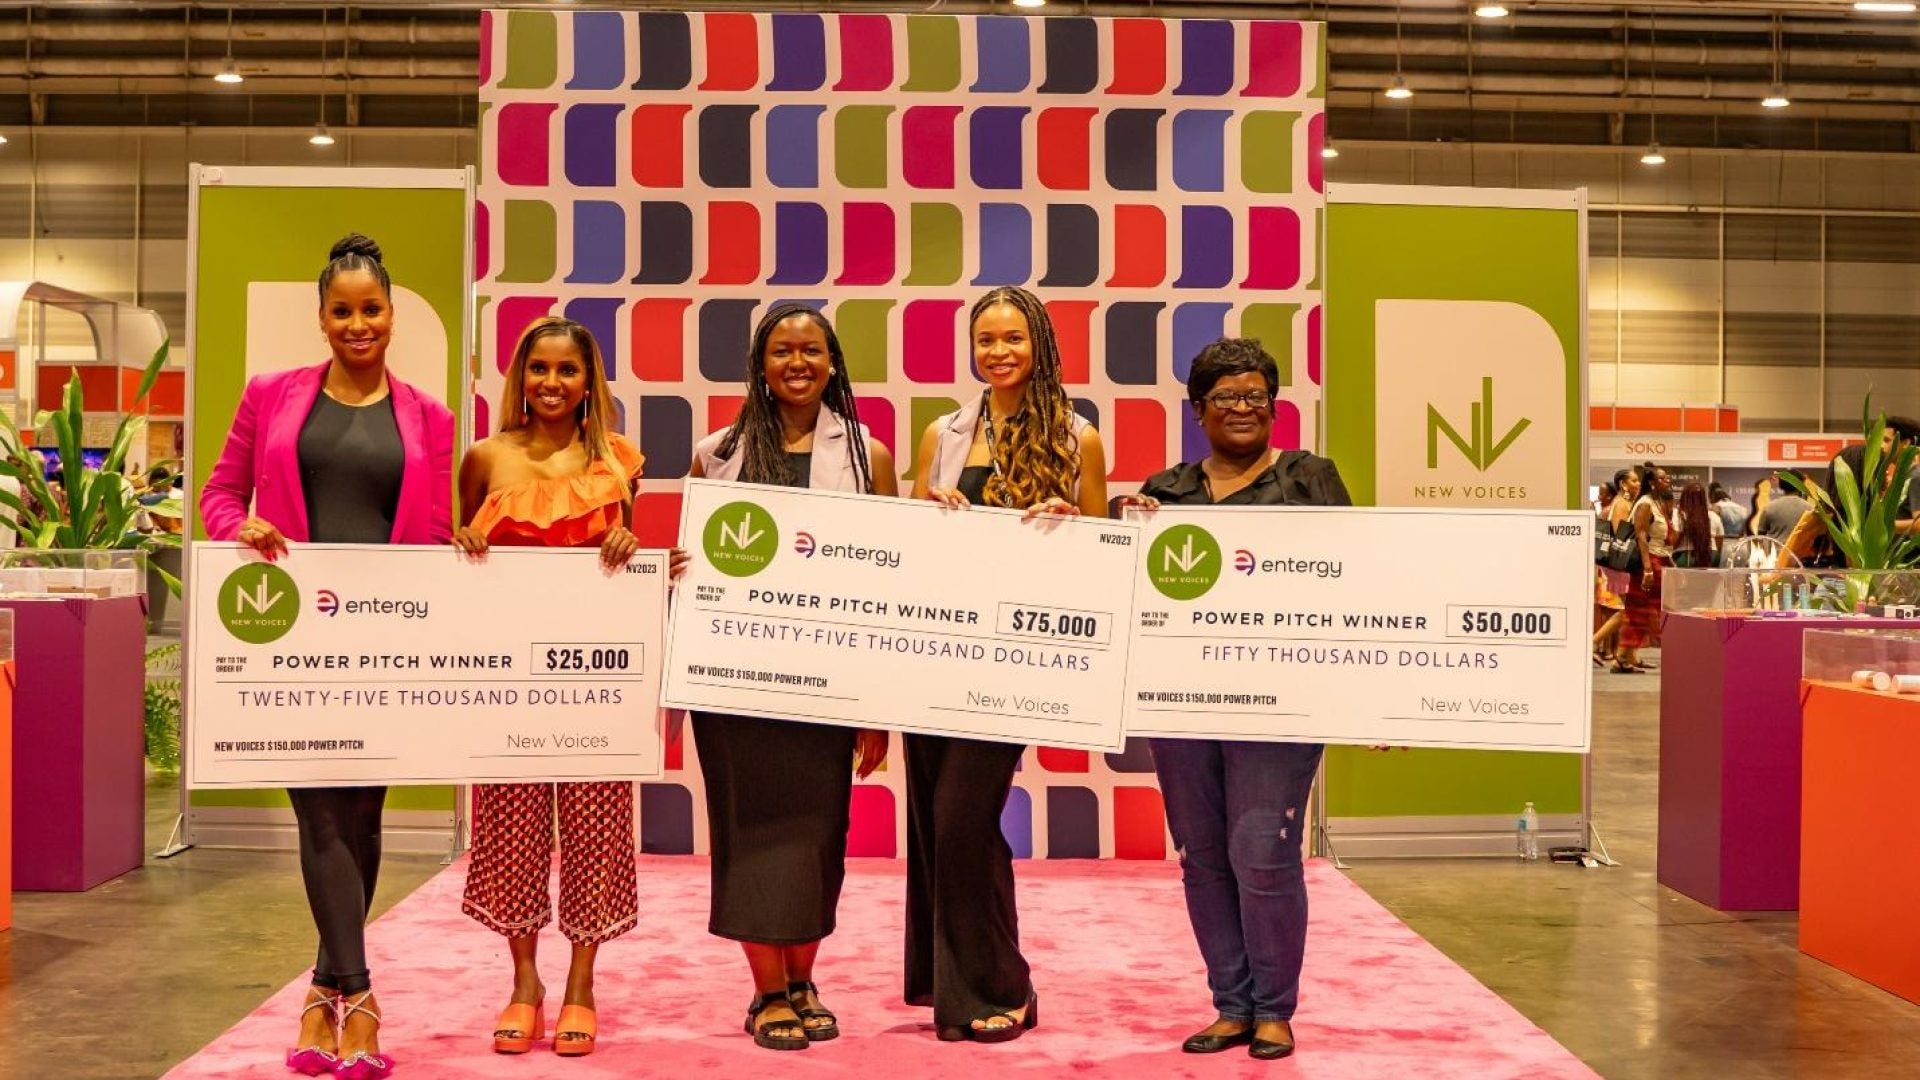 Meet The Winners Of The 2023 New Voices $150,000 Power Pitch